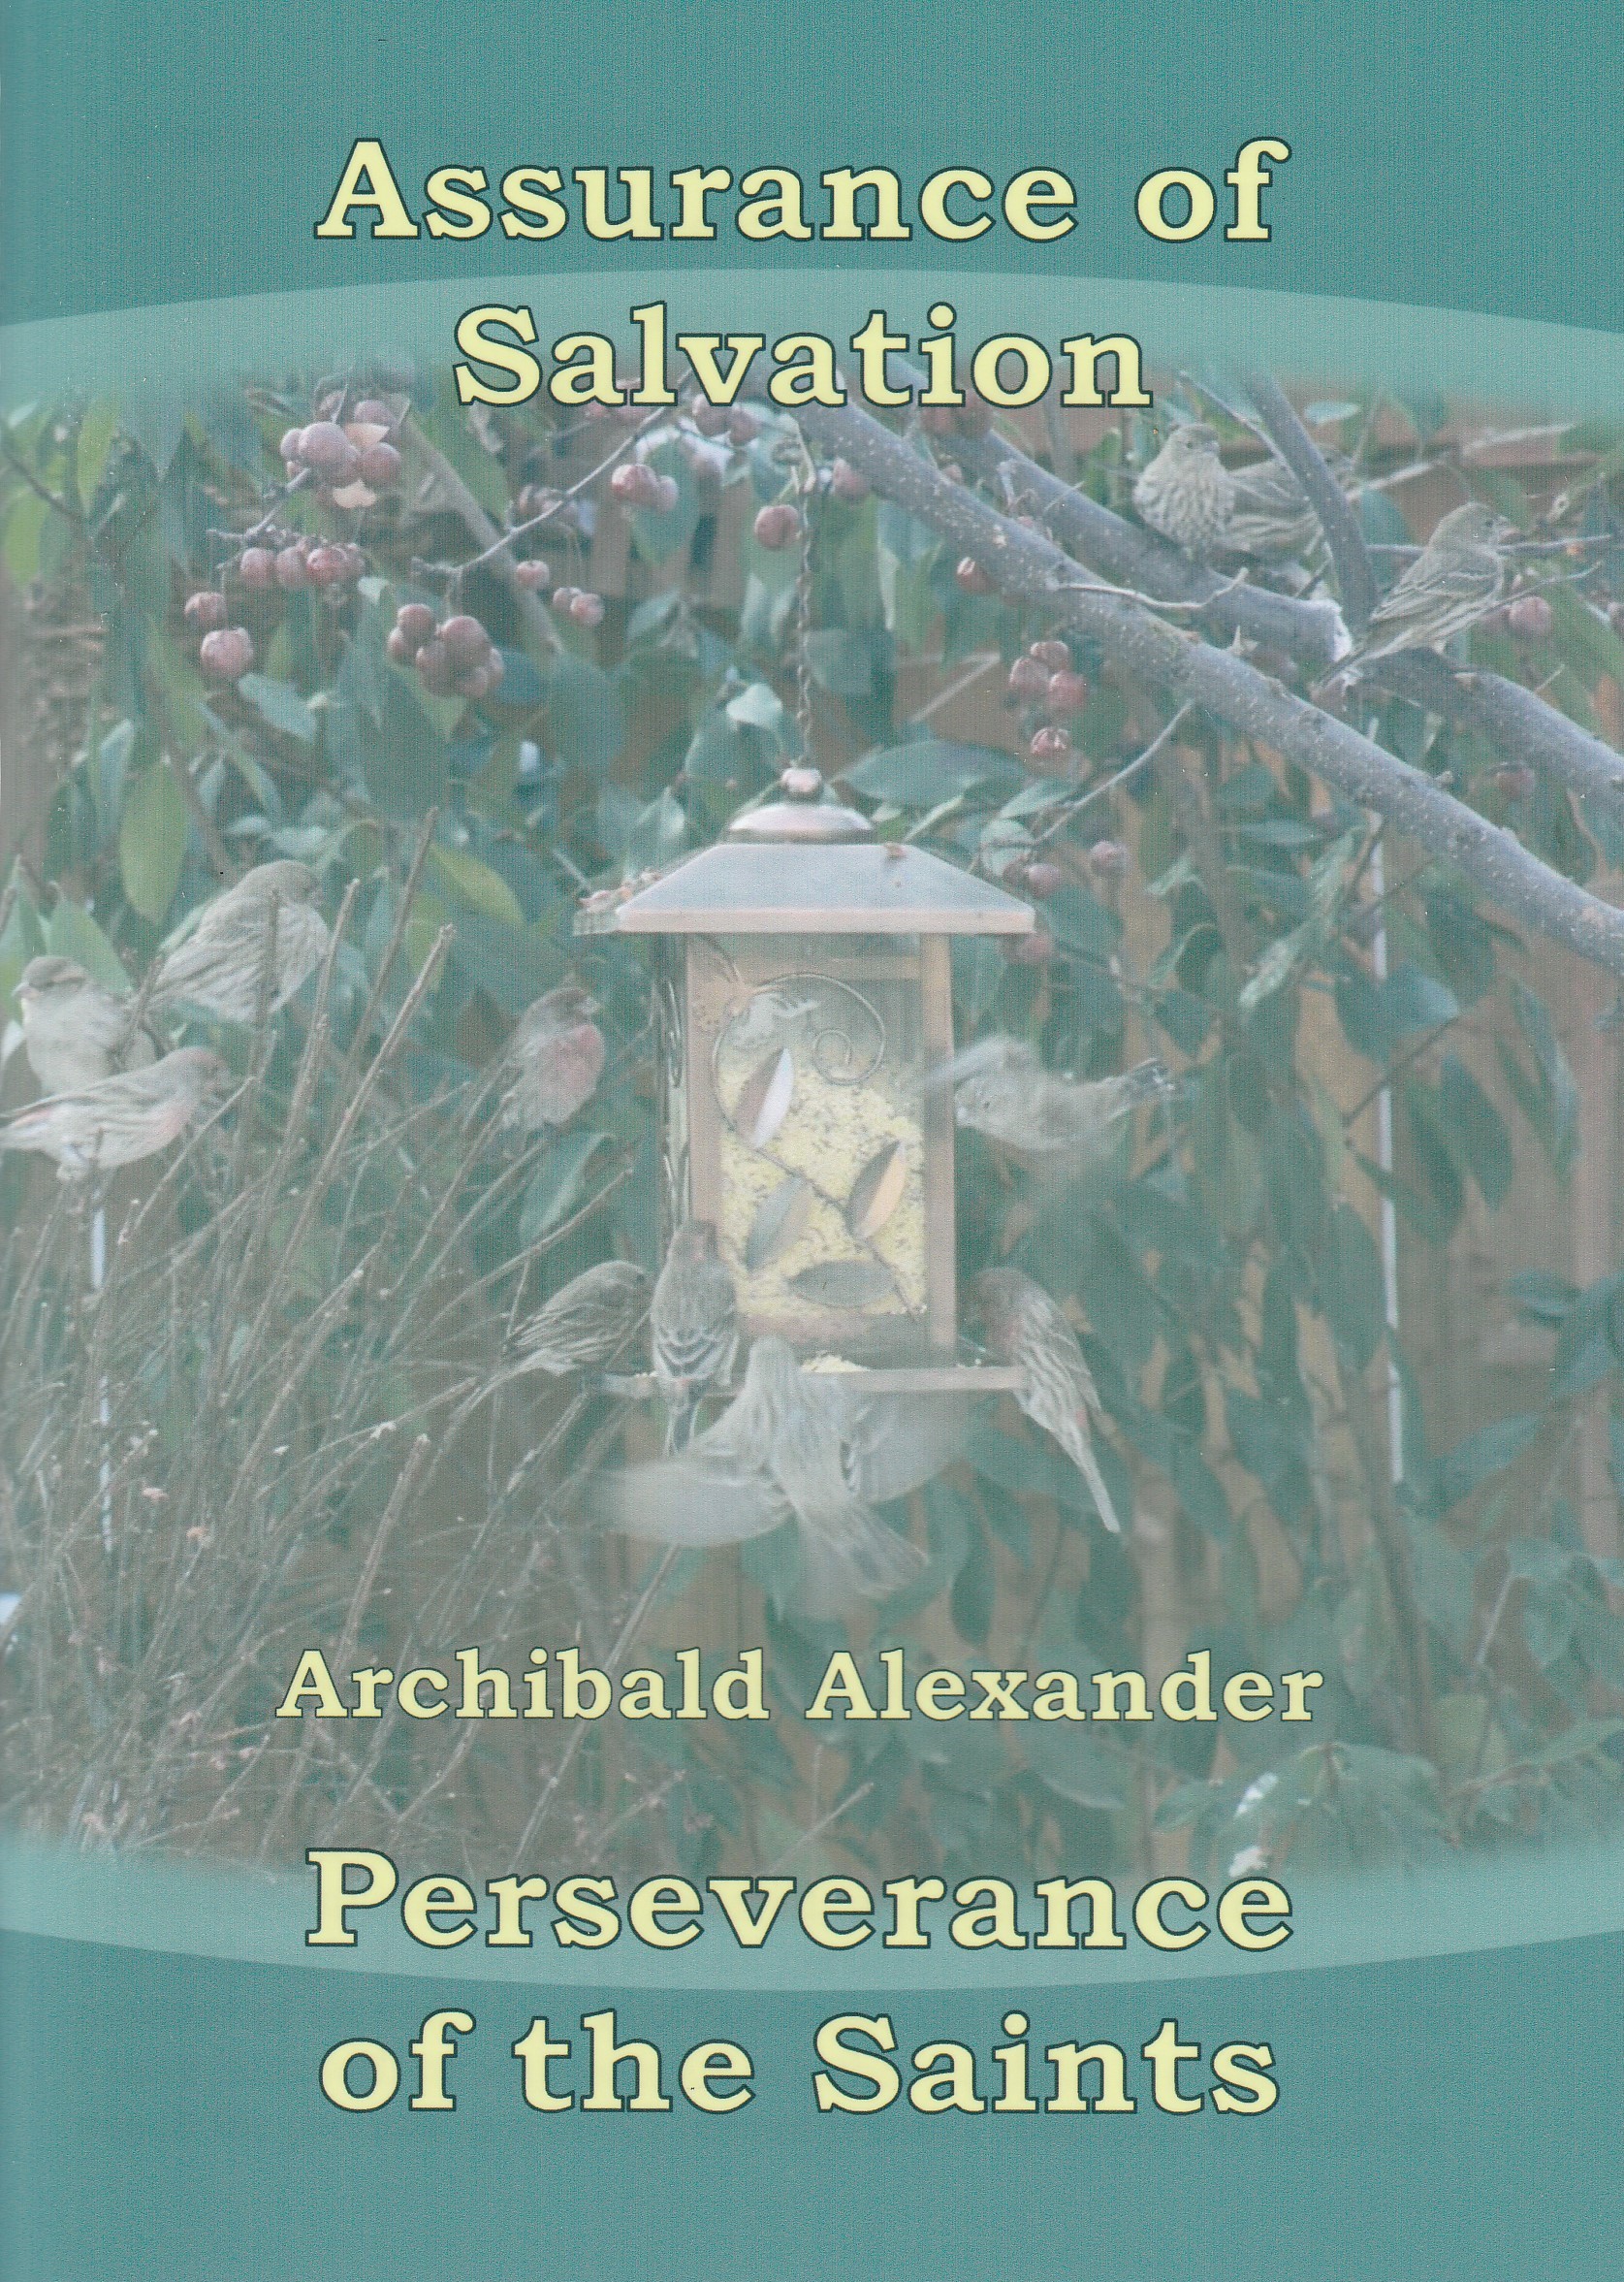 Assurance of Salvation & Perseverance of the Saints